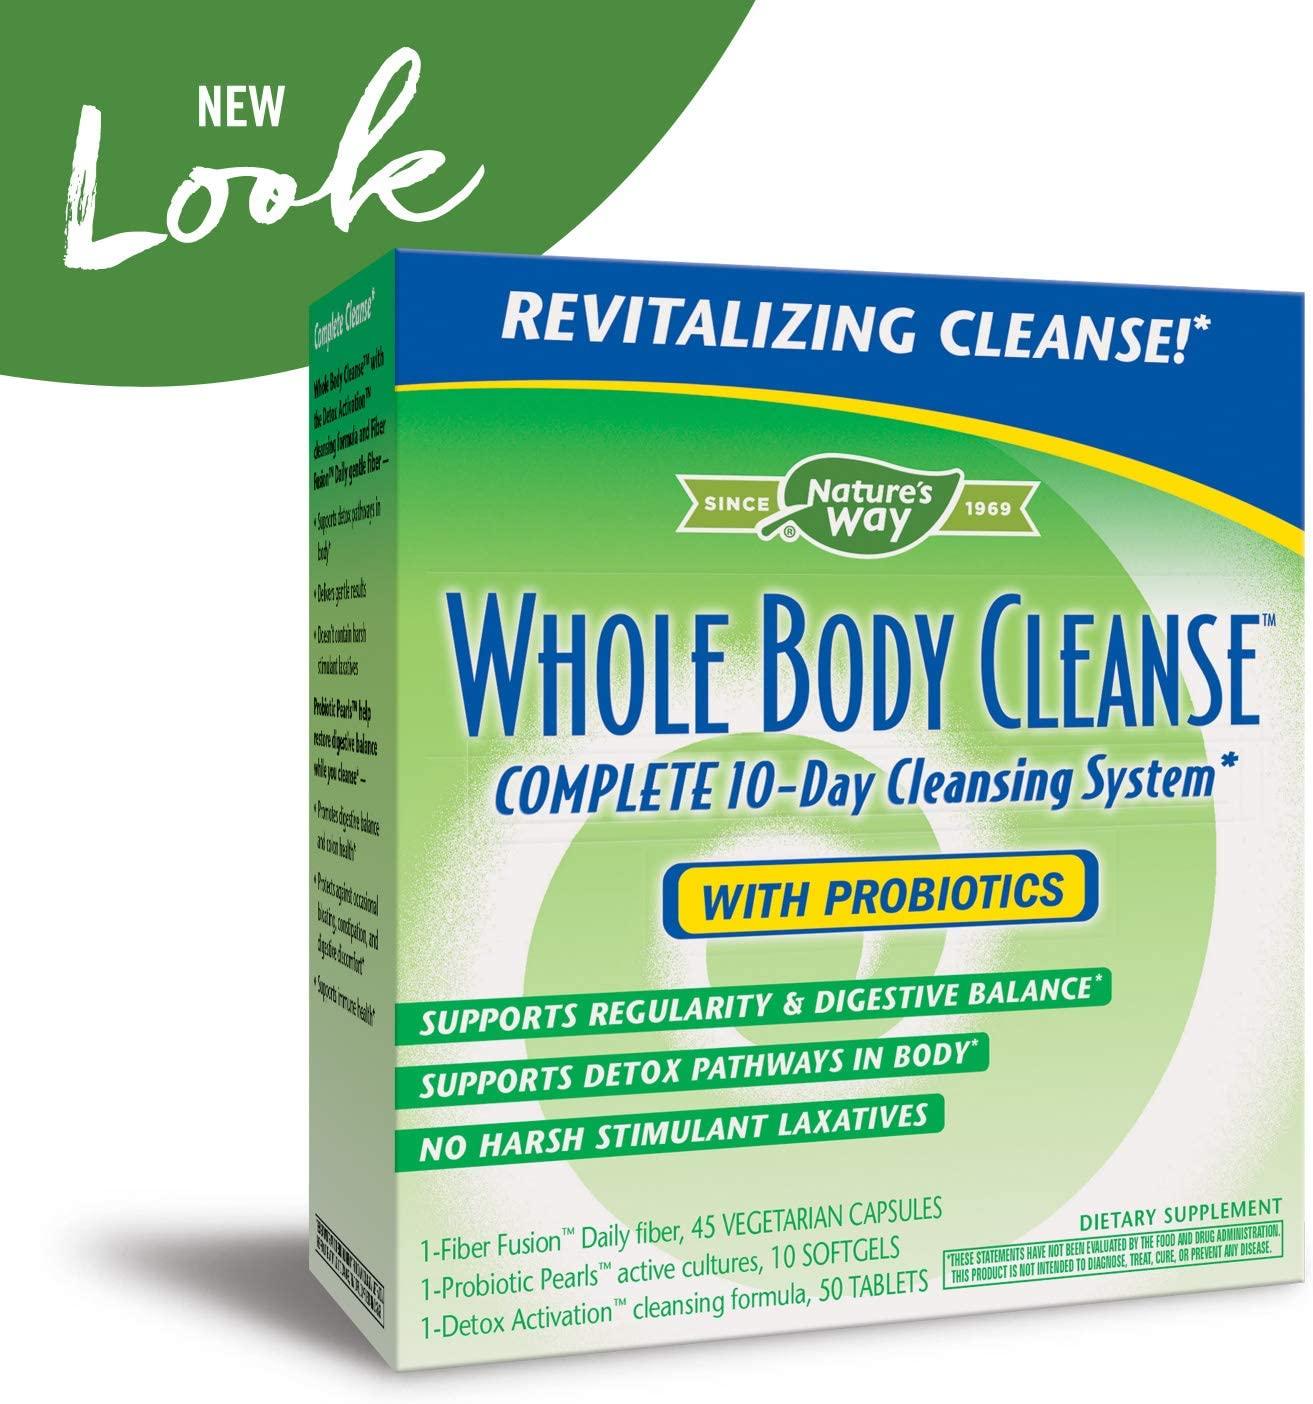 Body cleanse system